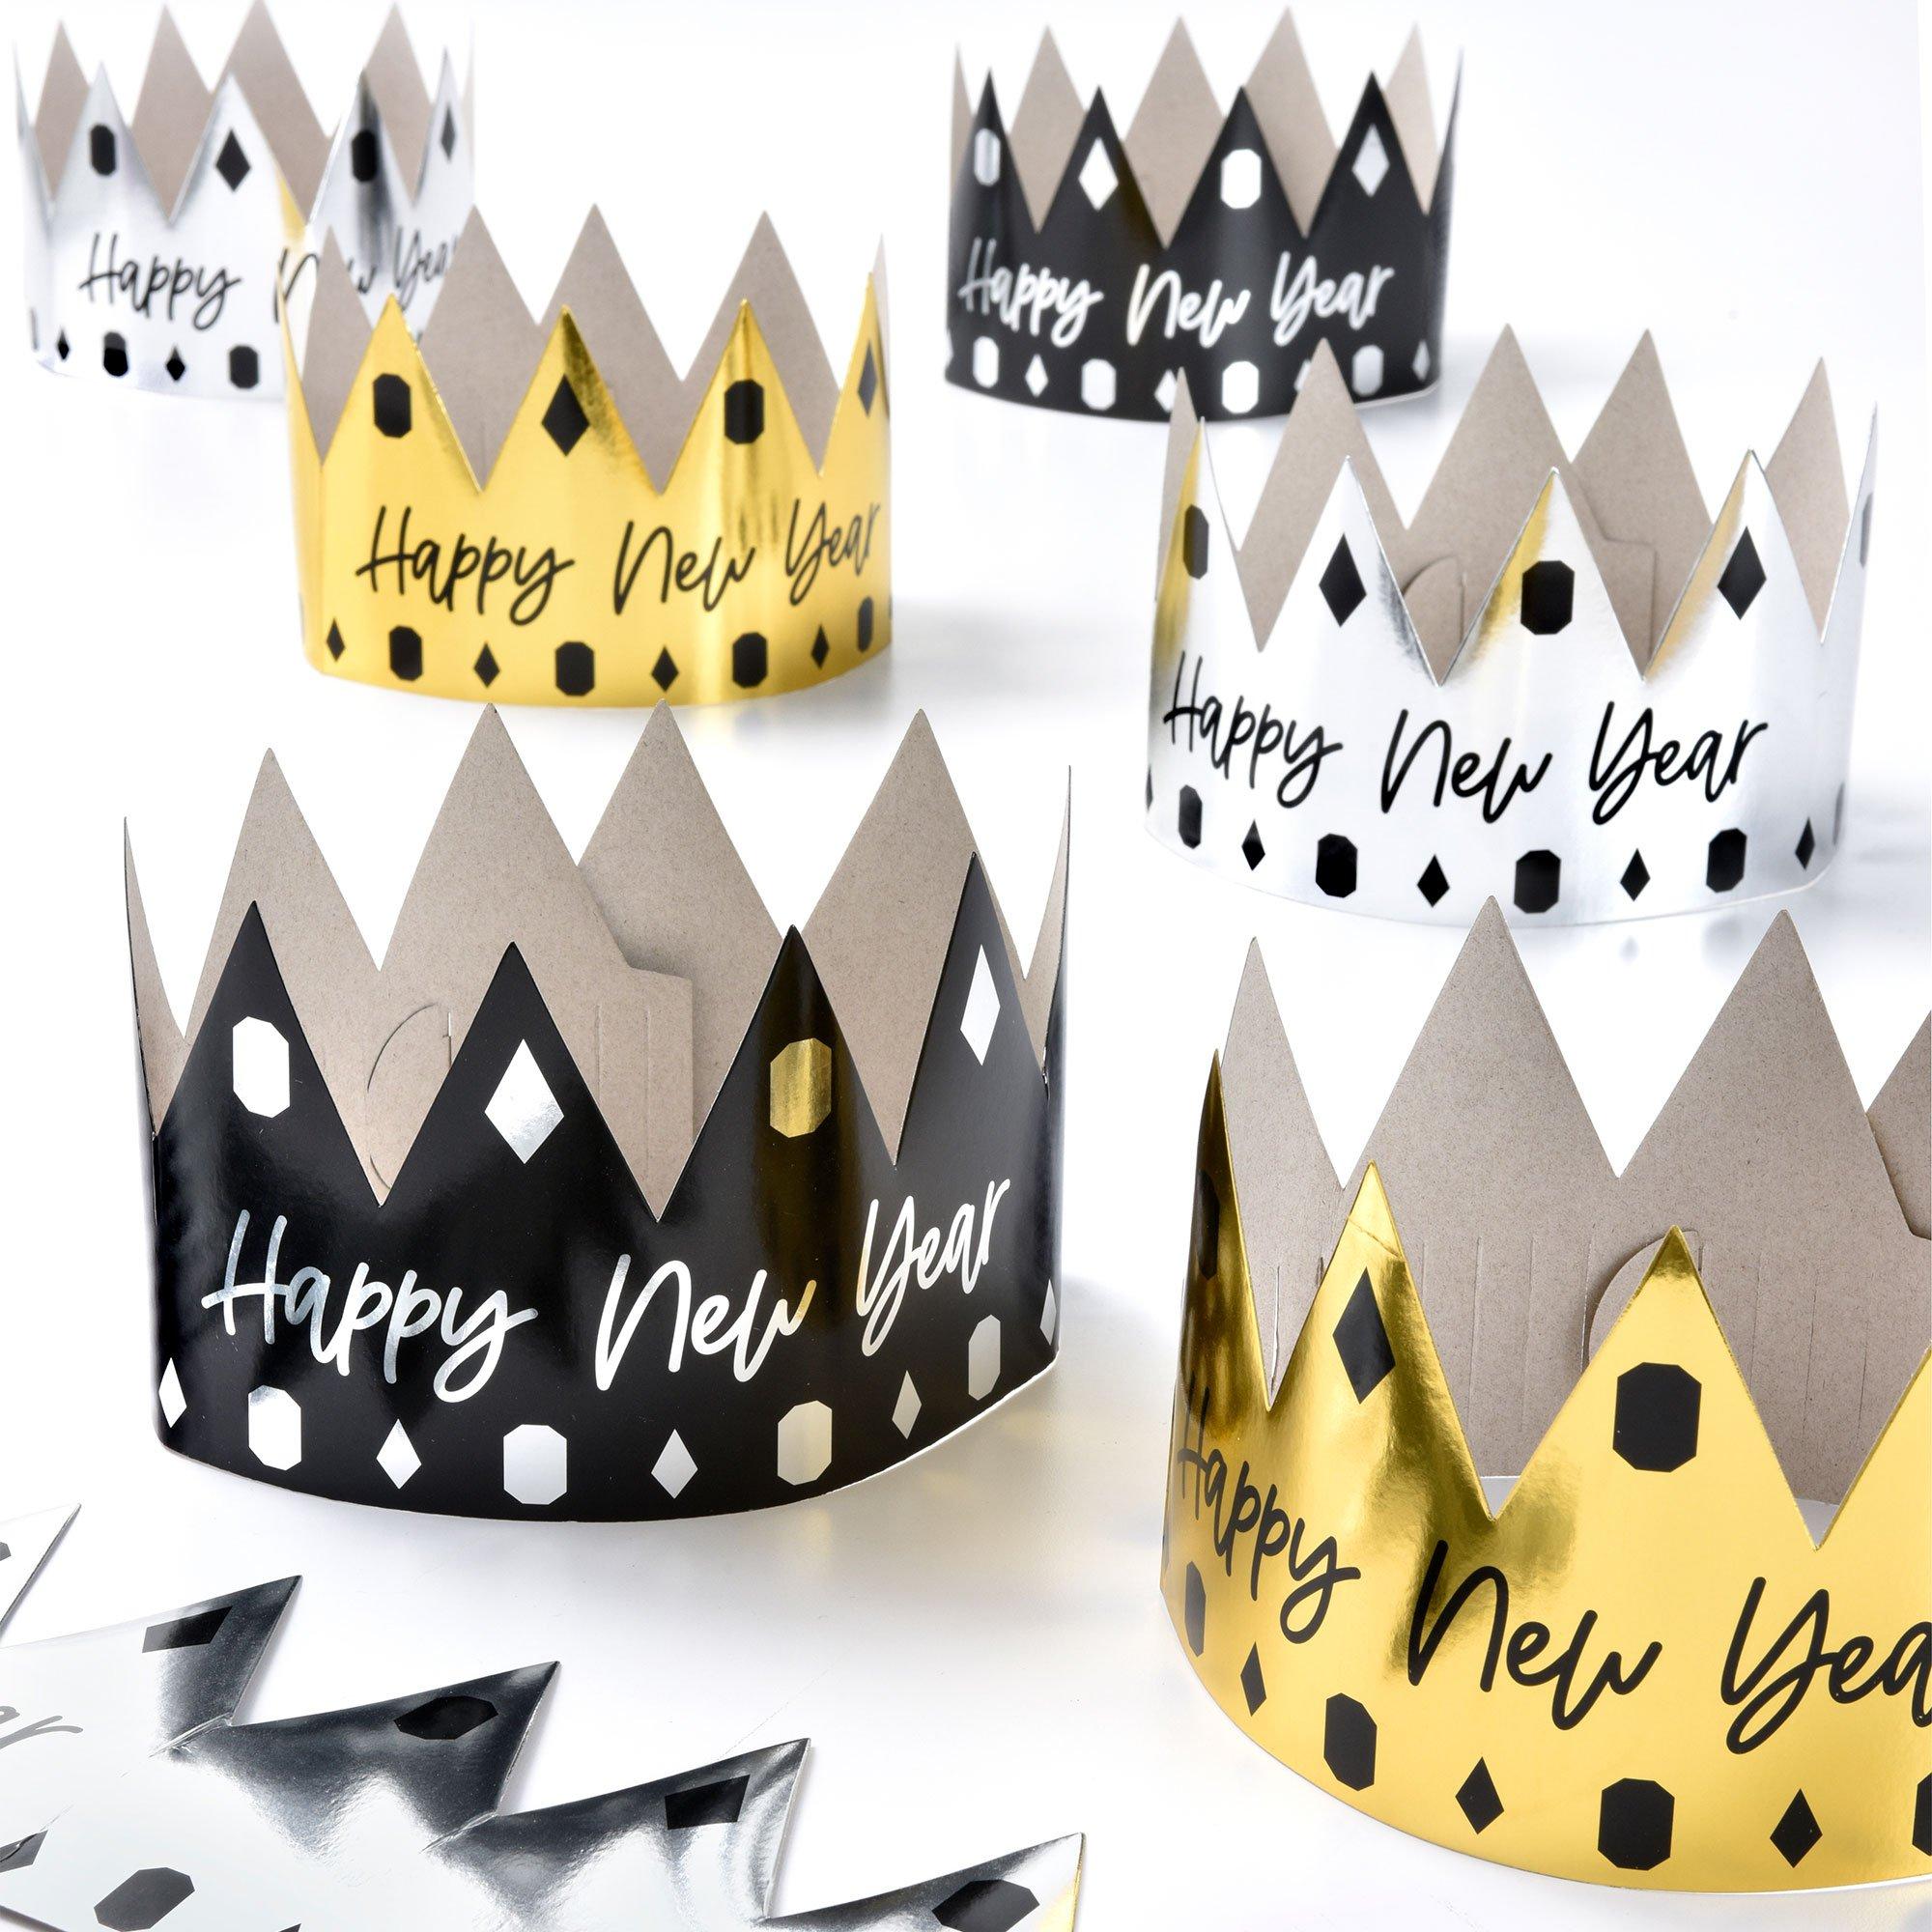 Black, Silver, & Gold New Year's Eve Paper Crowns, 12ct | Party City